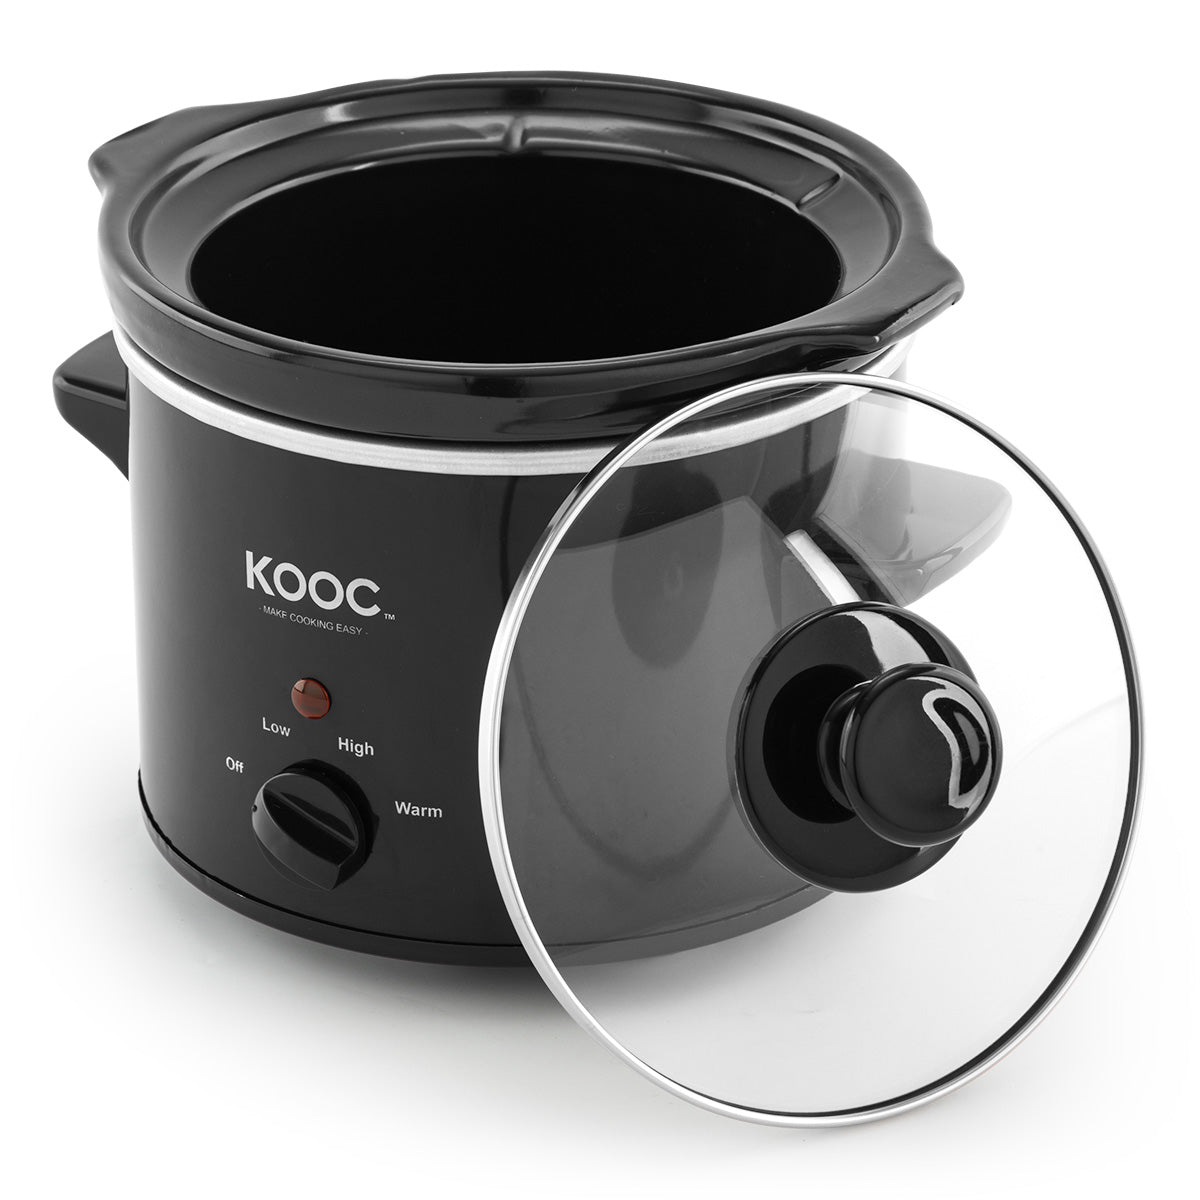 KOOC Small Slow Cooker, 2-Quart, Free Liners Included for Easy Clean-up,  Upgraded Ceramic Pot, Adjustable Temp, Nutrient Loss Reduction, Stainless  Steel, Red, Round